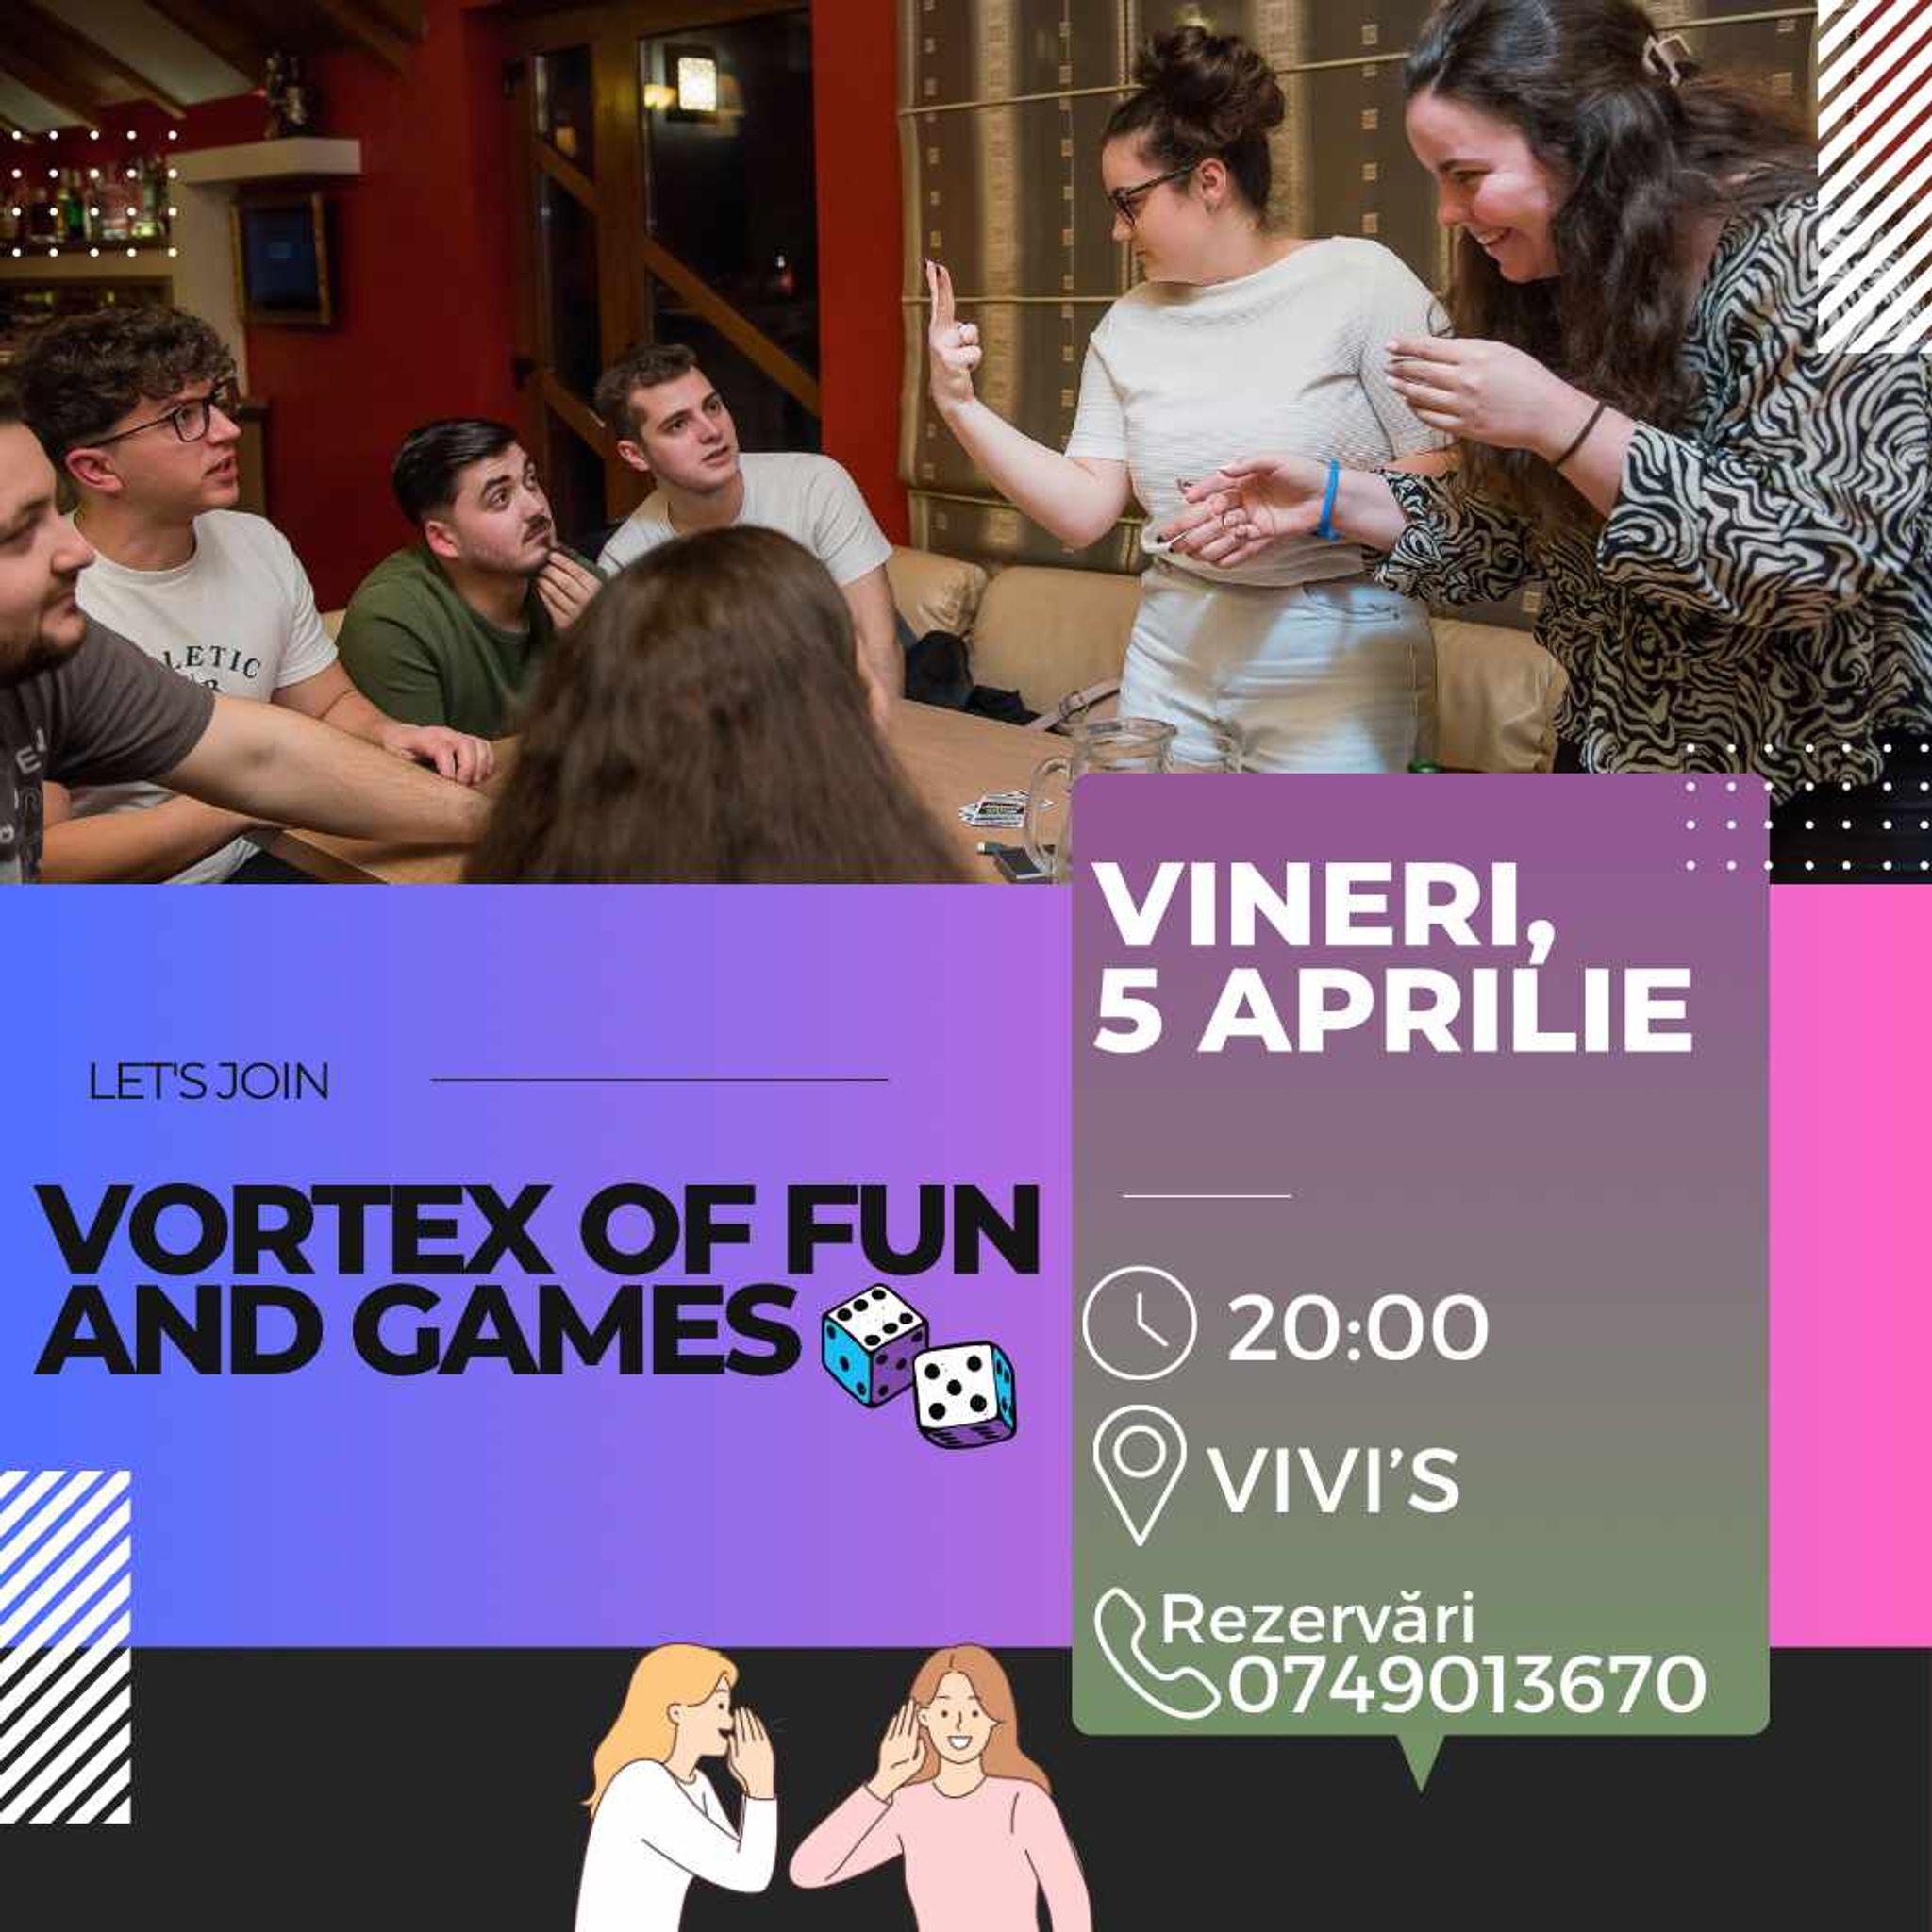 Vortex of fun and games